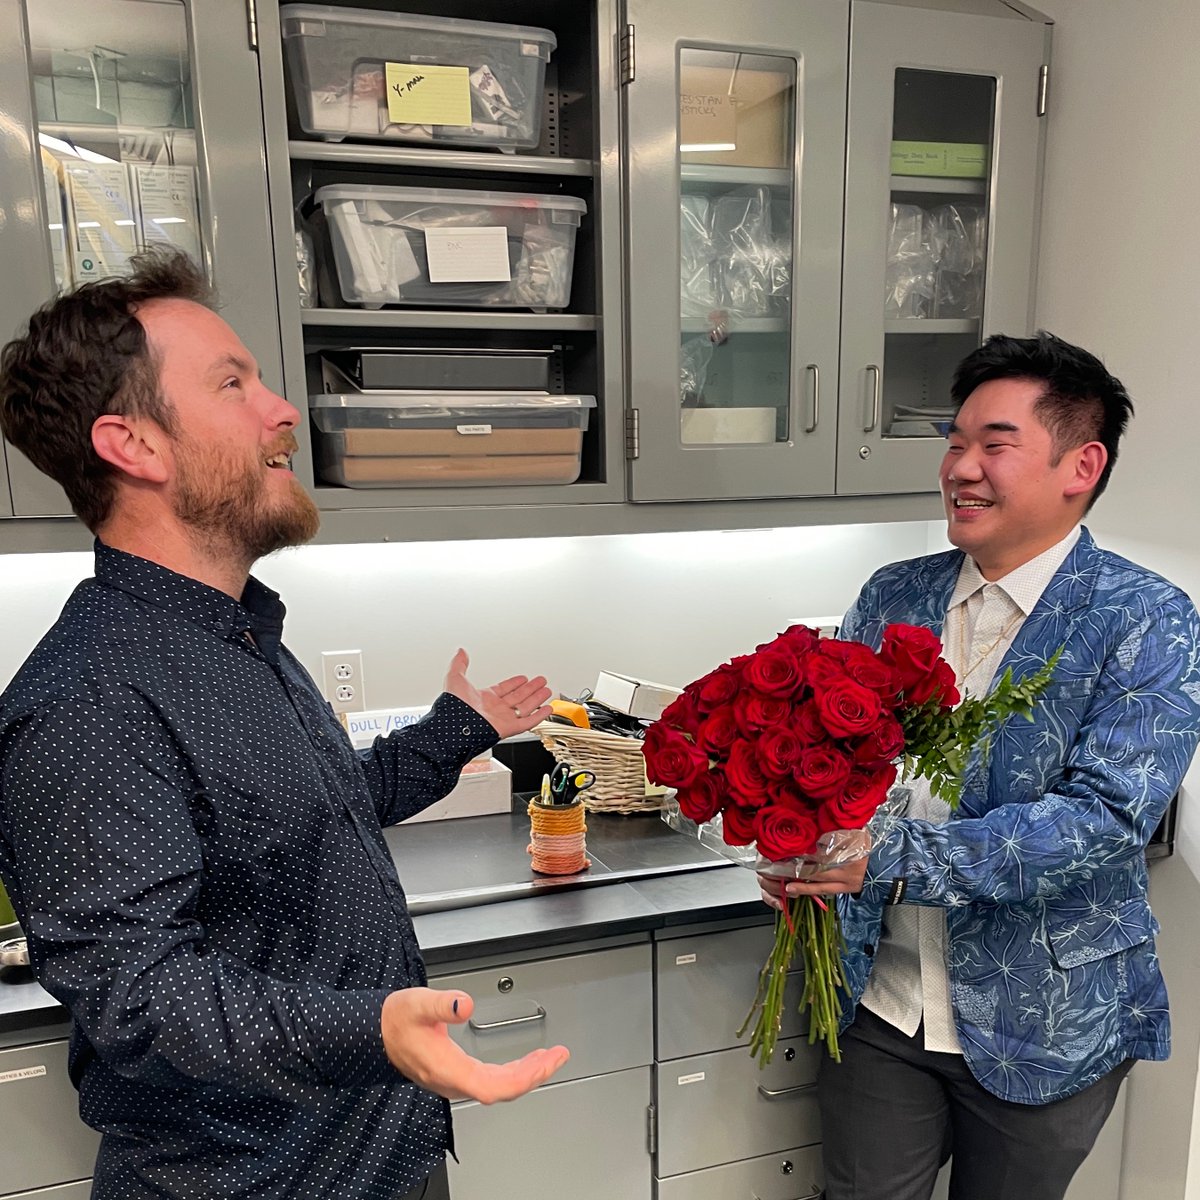 The biggest congratulations to newly-minted Dr Alex @runninghsu !!!! Great presentation, and always a good idea to get your PI roses (not actually for me)